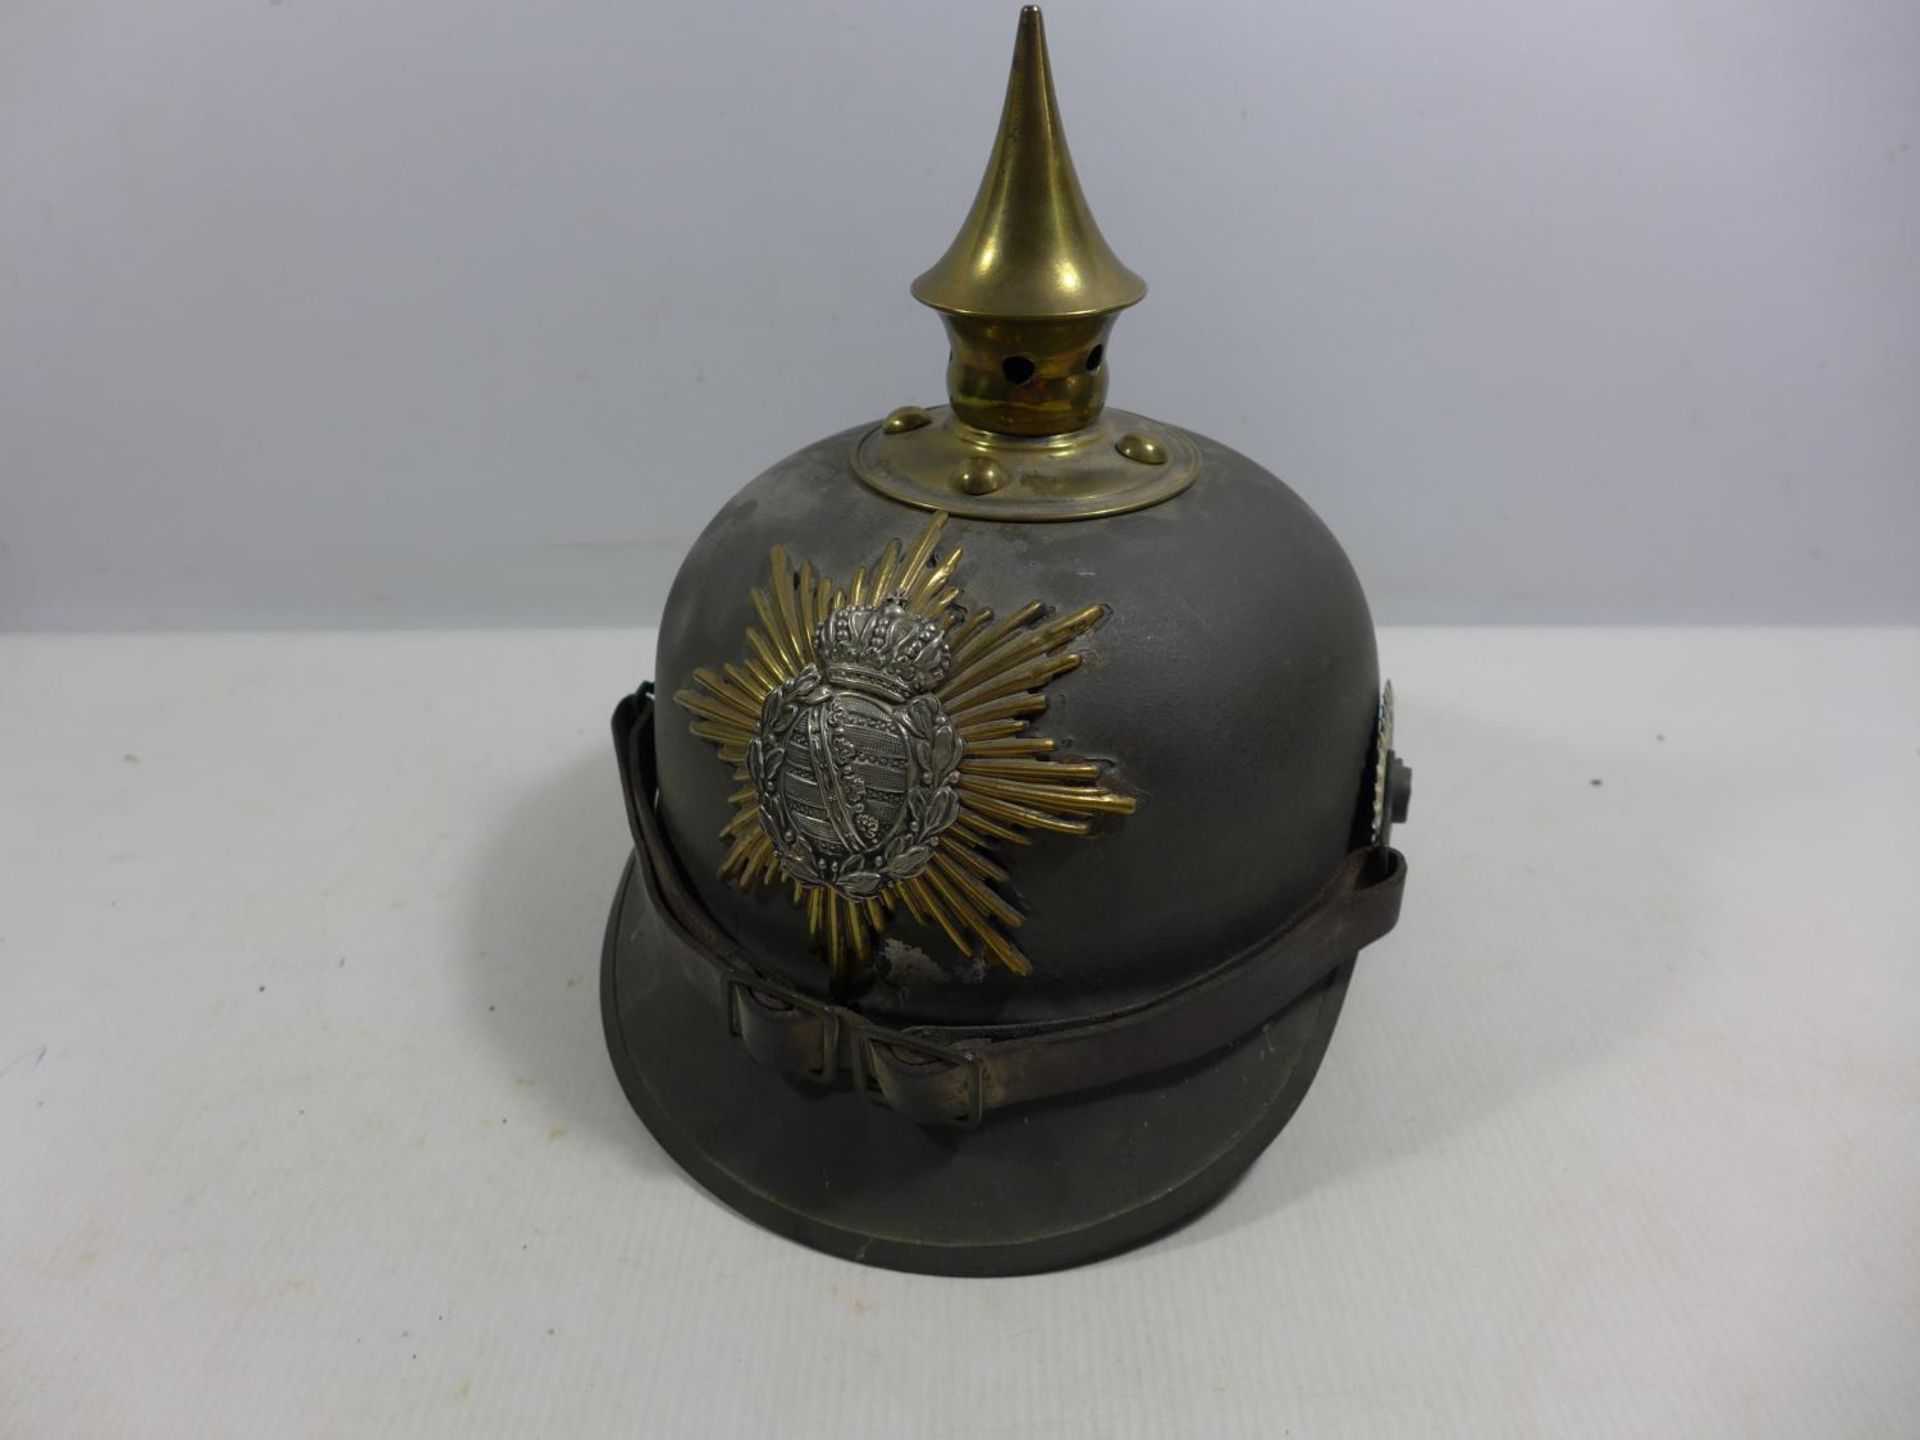 A REPLICA IMPERIAL GERMAN PICKELHAUBE METAL HELMET WITH LEATHER LINING